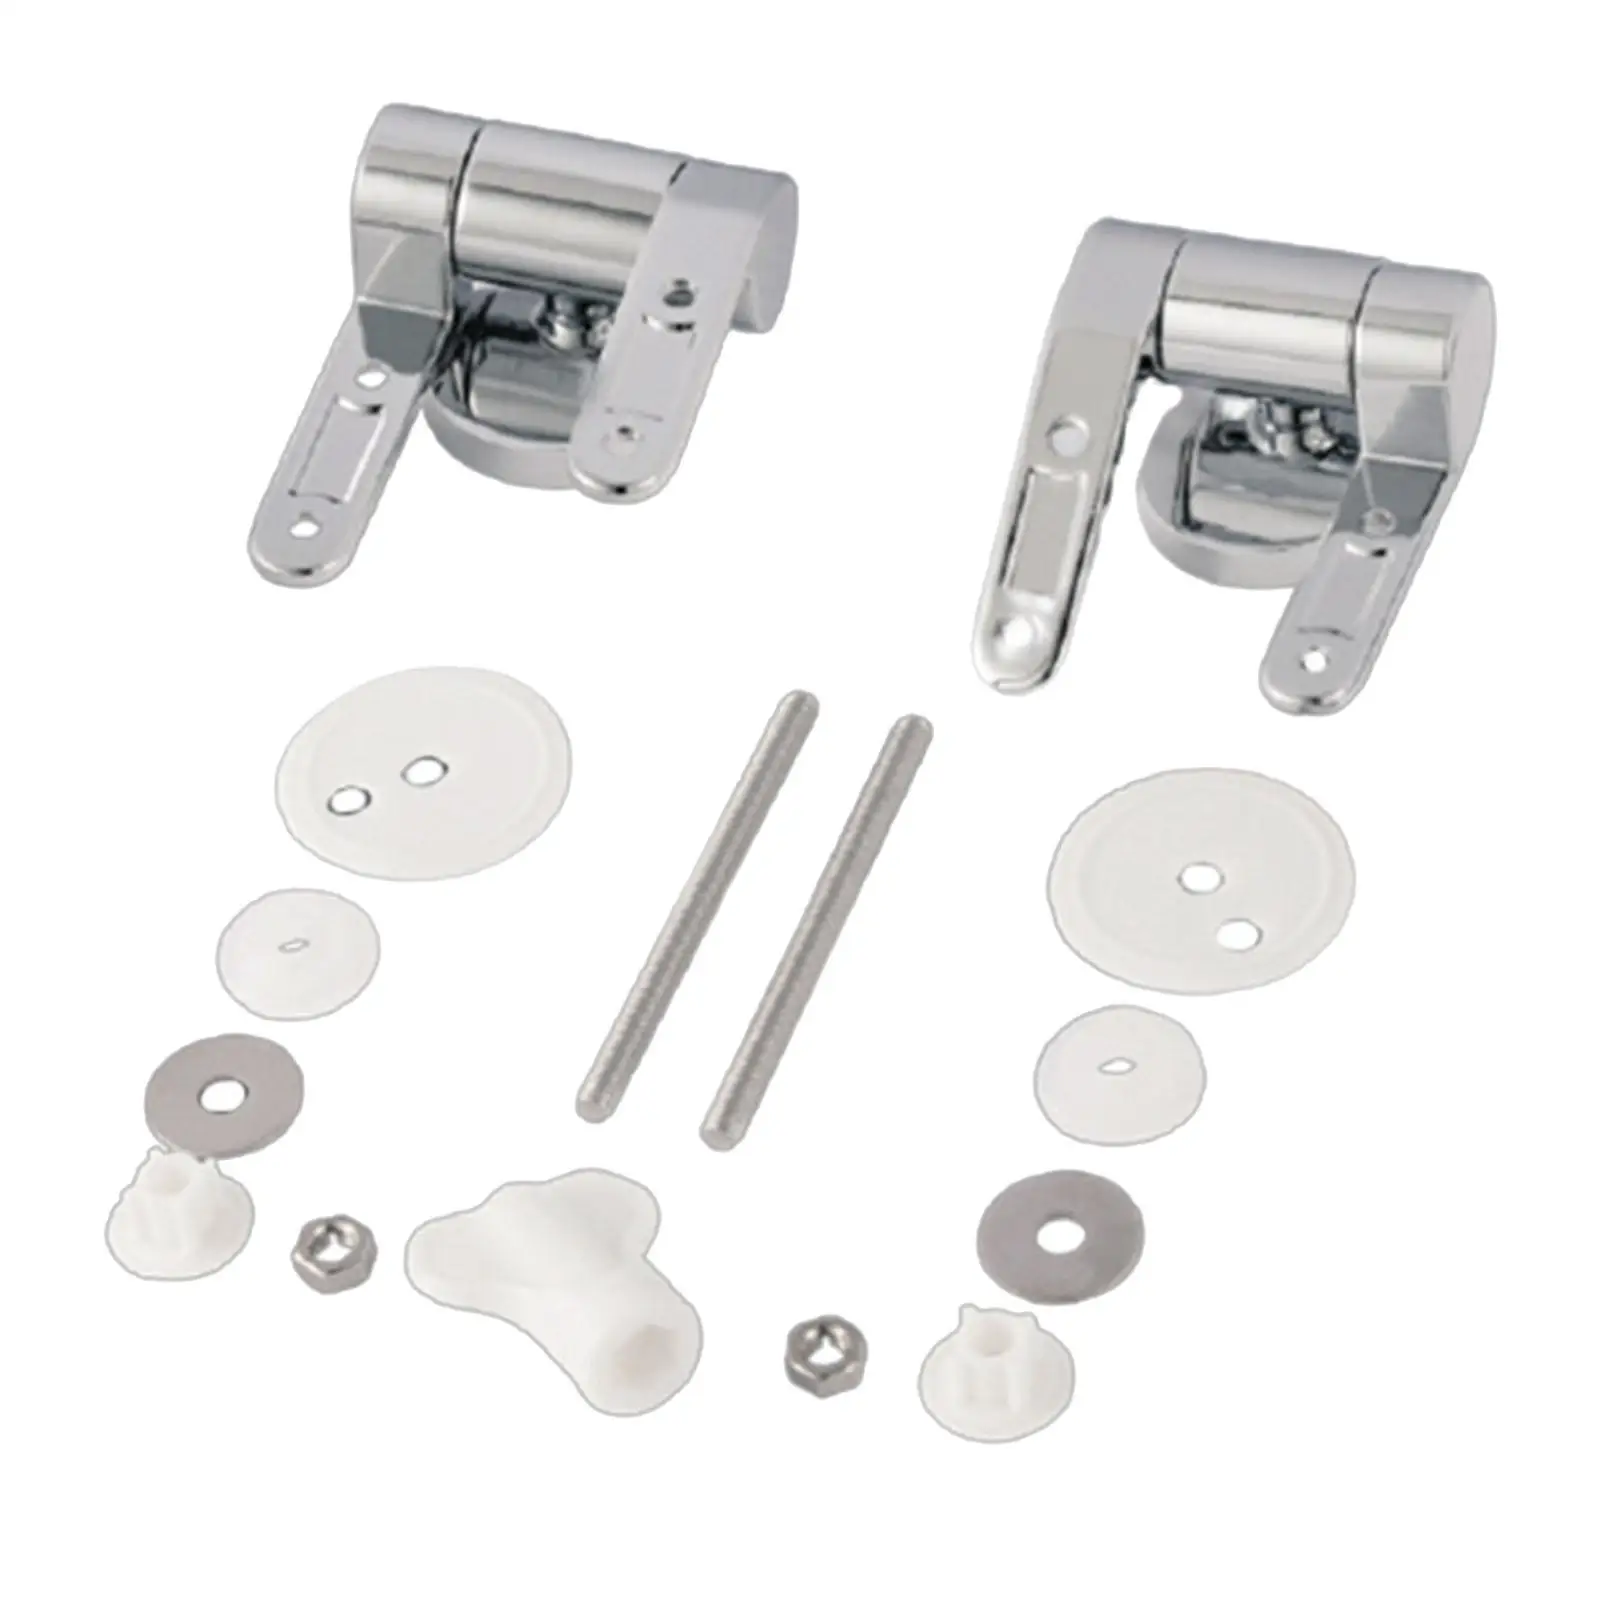 Toilet Seat Hinge Repair Connector Accessories Cover Hinge Fixing Bracket for Kitchen Washing Machine Toilet Lids Flipping Bath